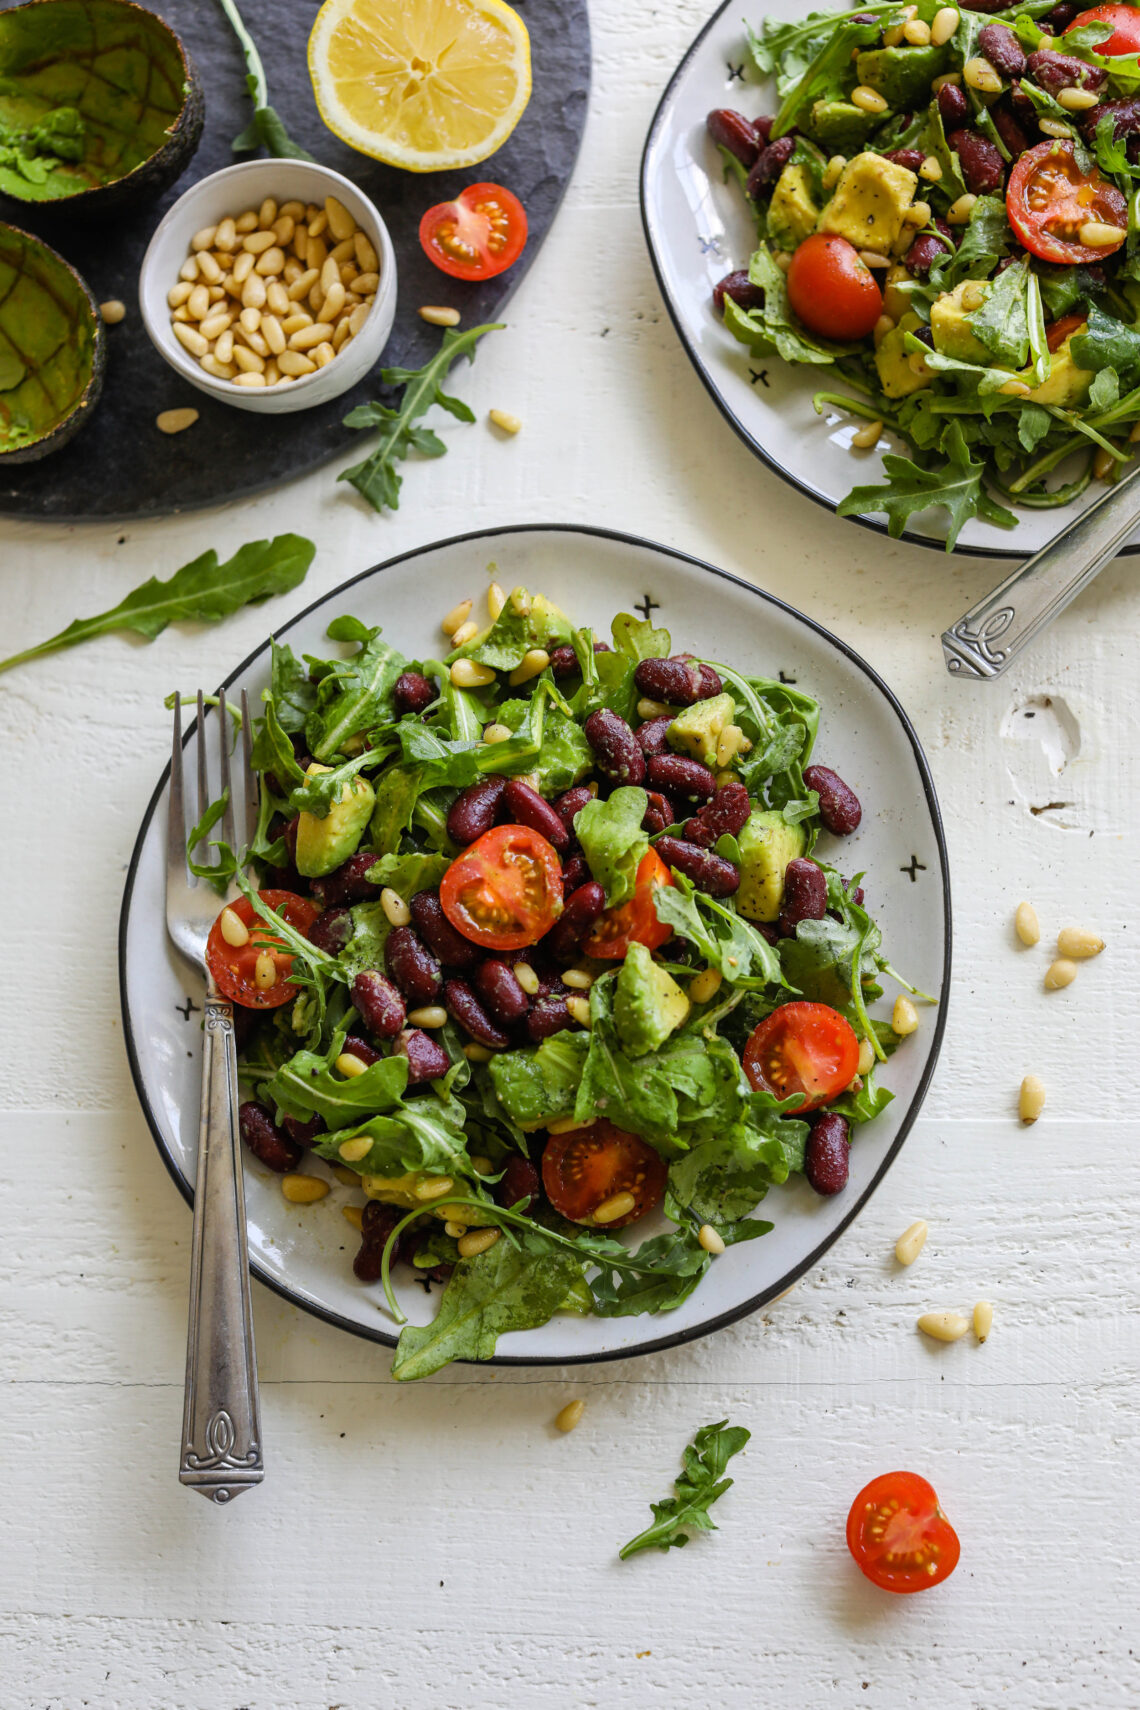 Cherry tomatoes and kidney bean salad